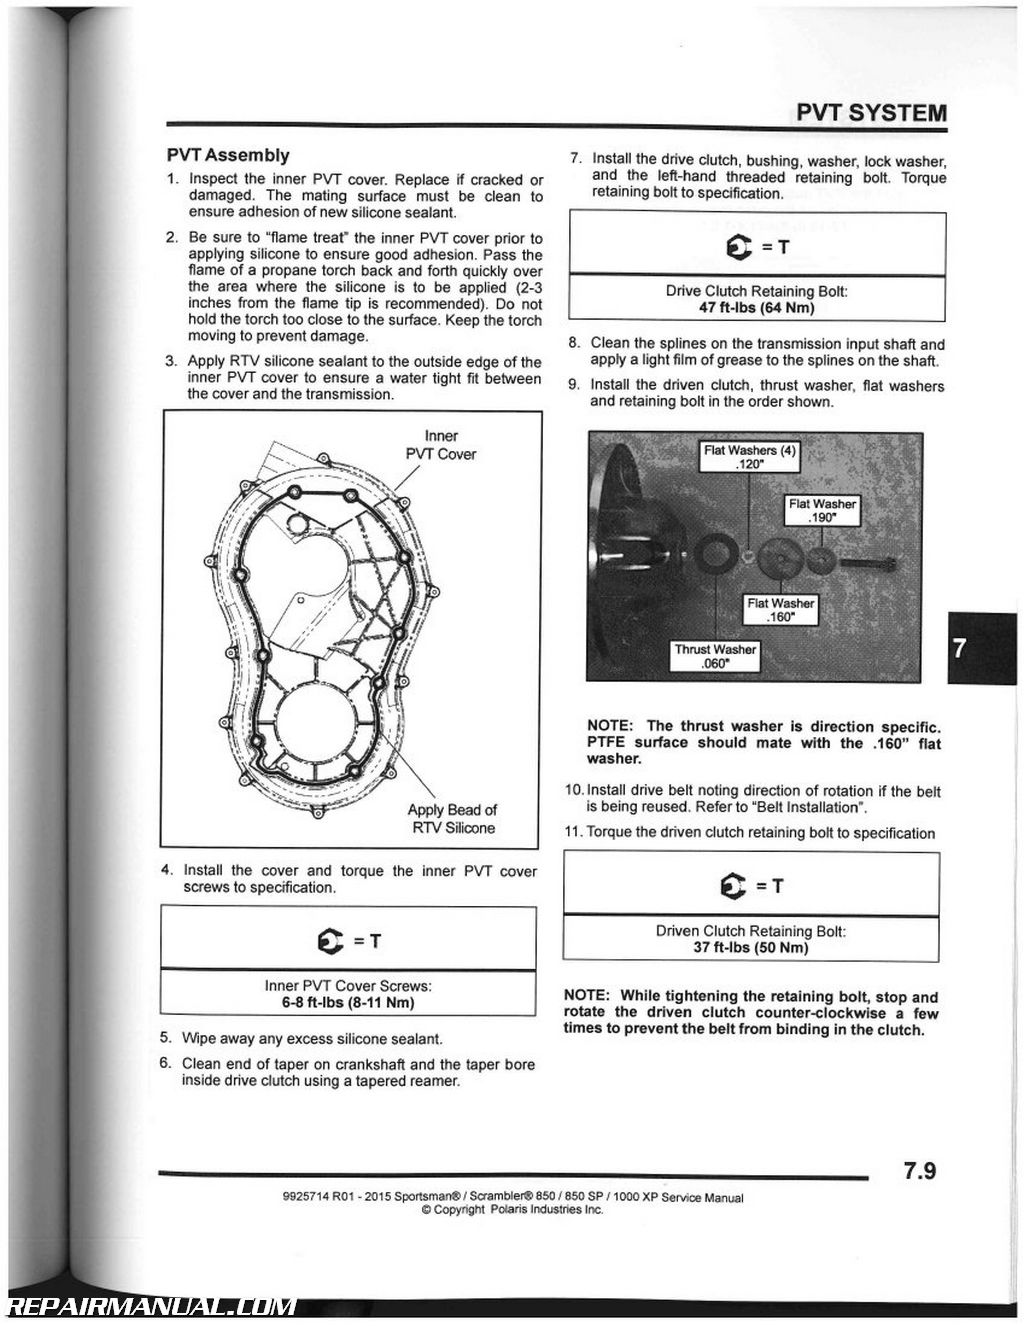 Where can you get a replacement Polaris owners manual?